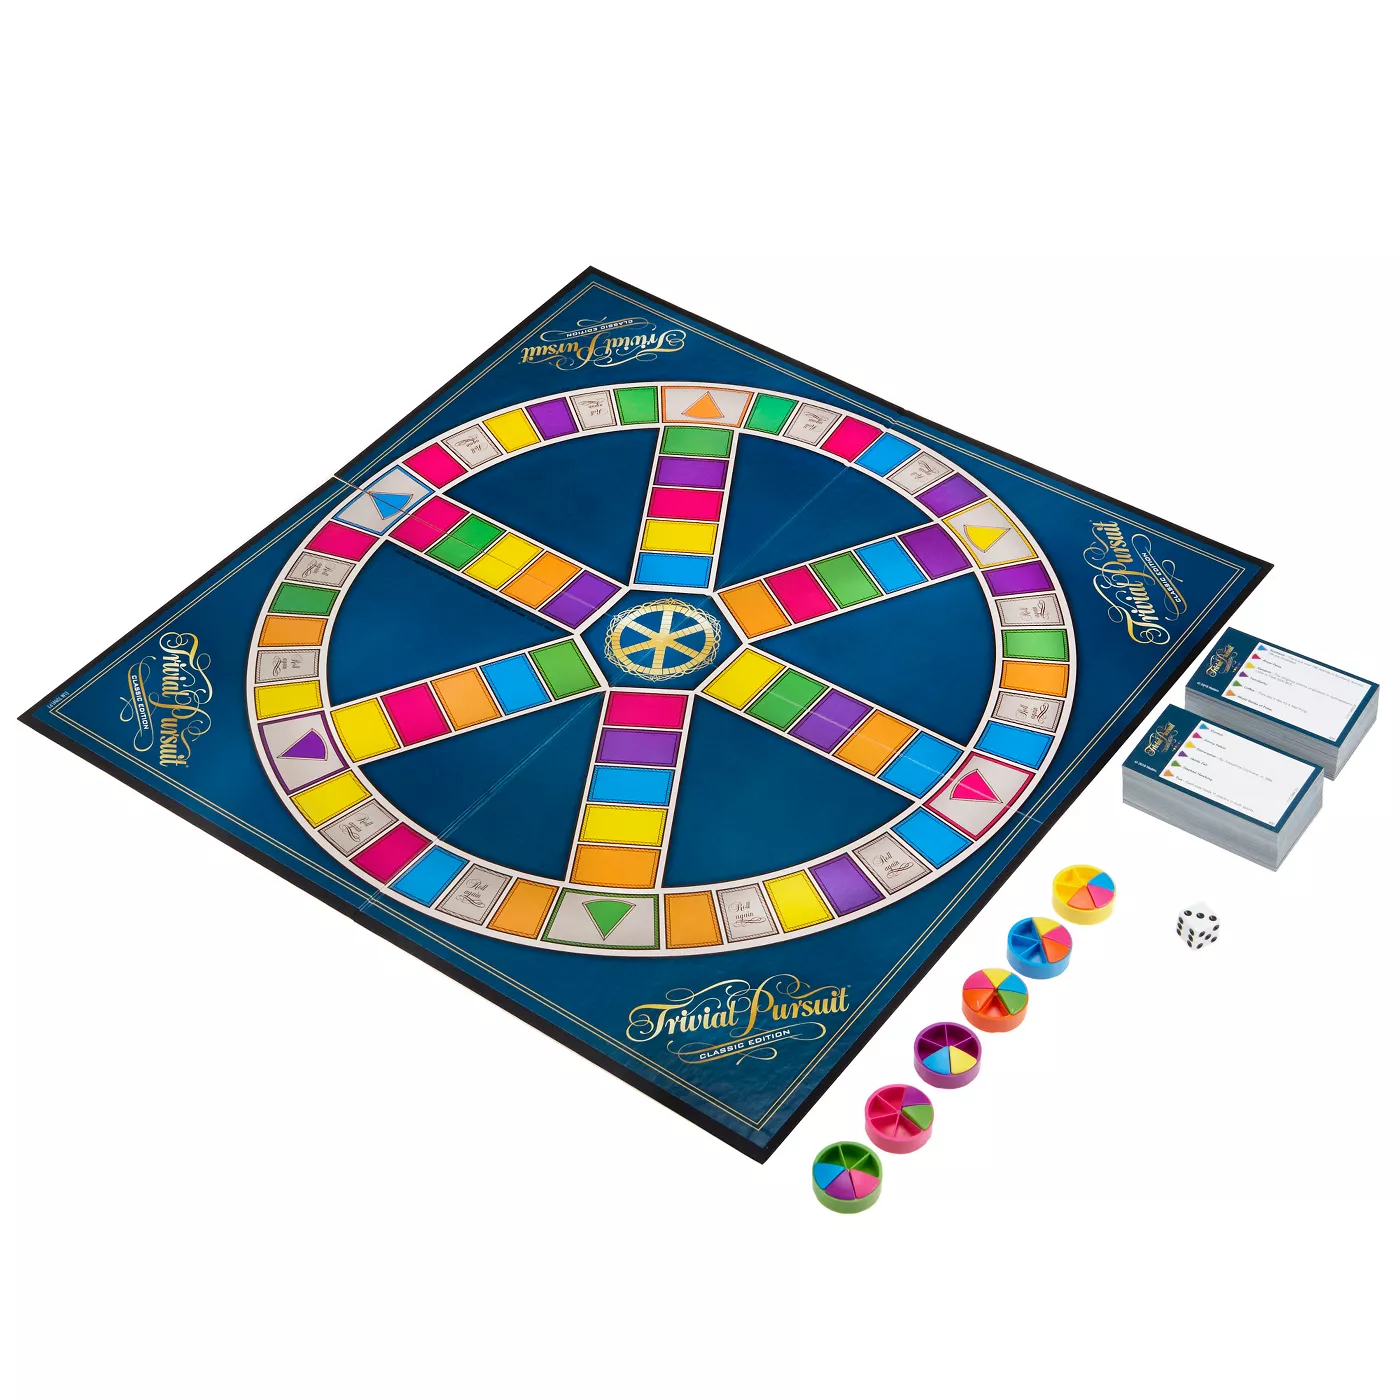 Trivial Pursuit Game: Classic Edition - image 3 of 10